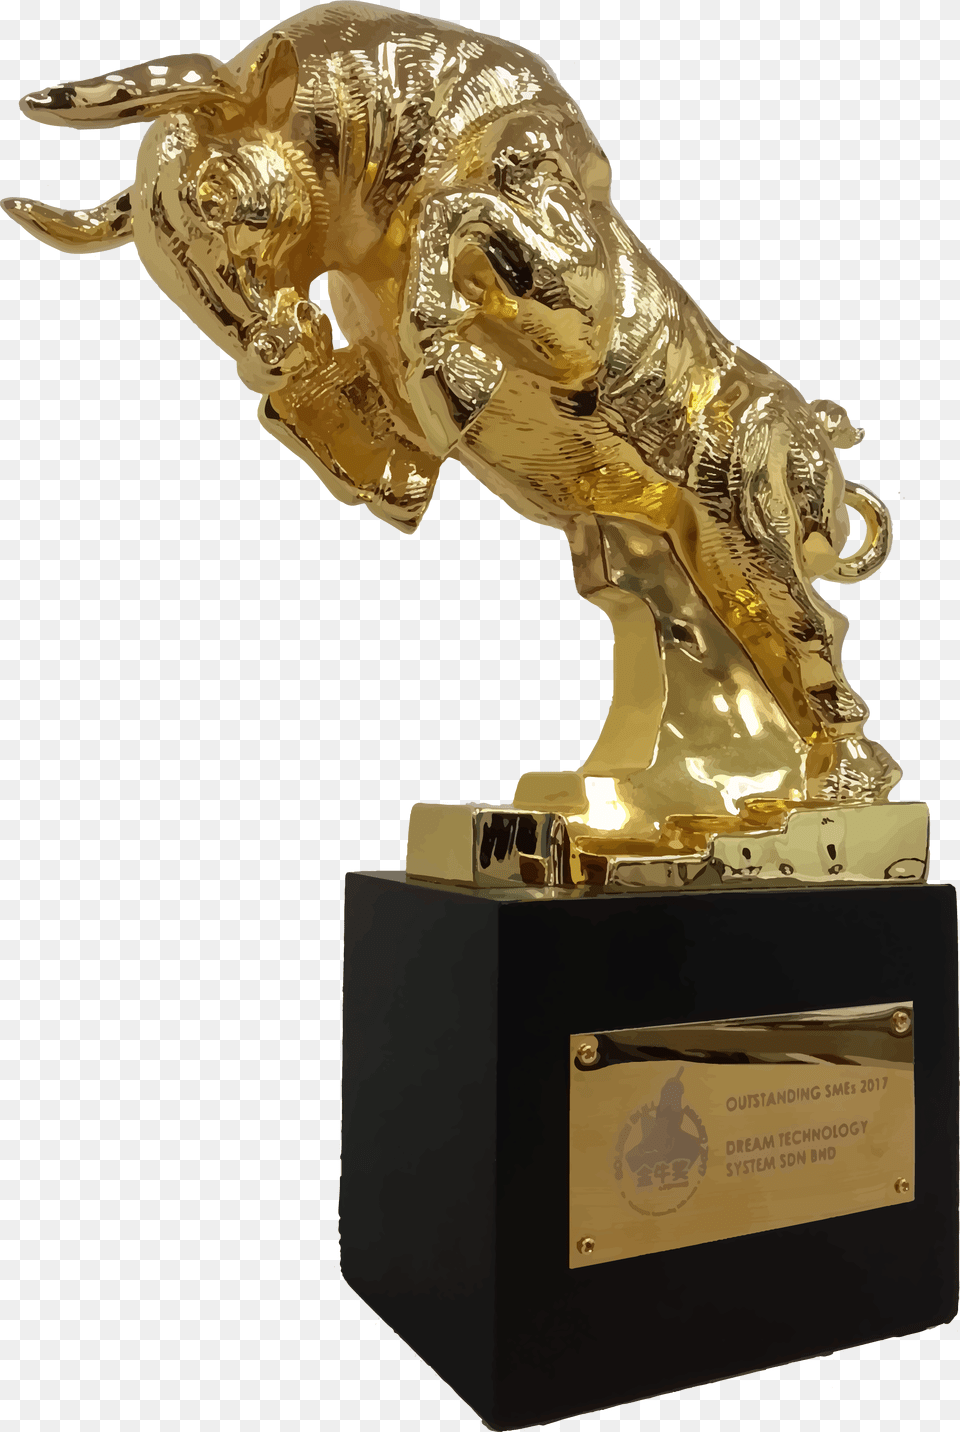 Dts Gba2017 Trophy Golden Bull Award 2018 Free Png